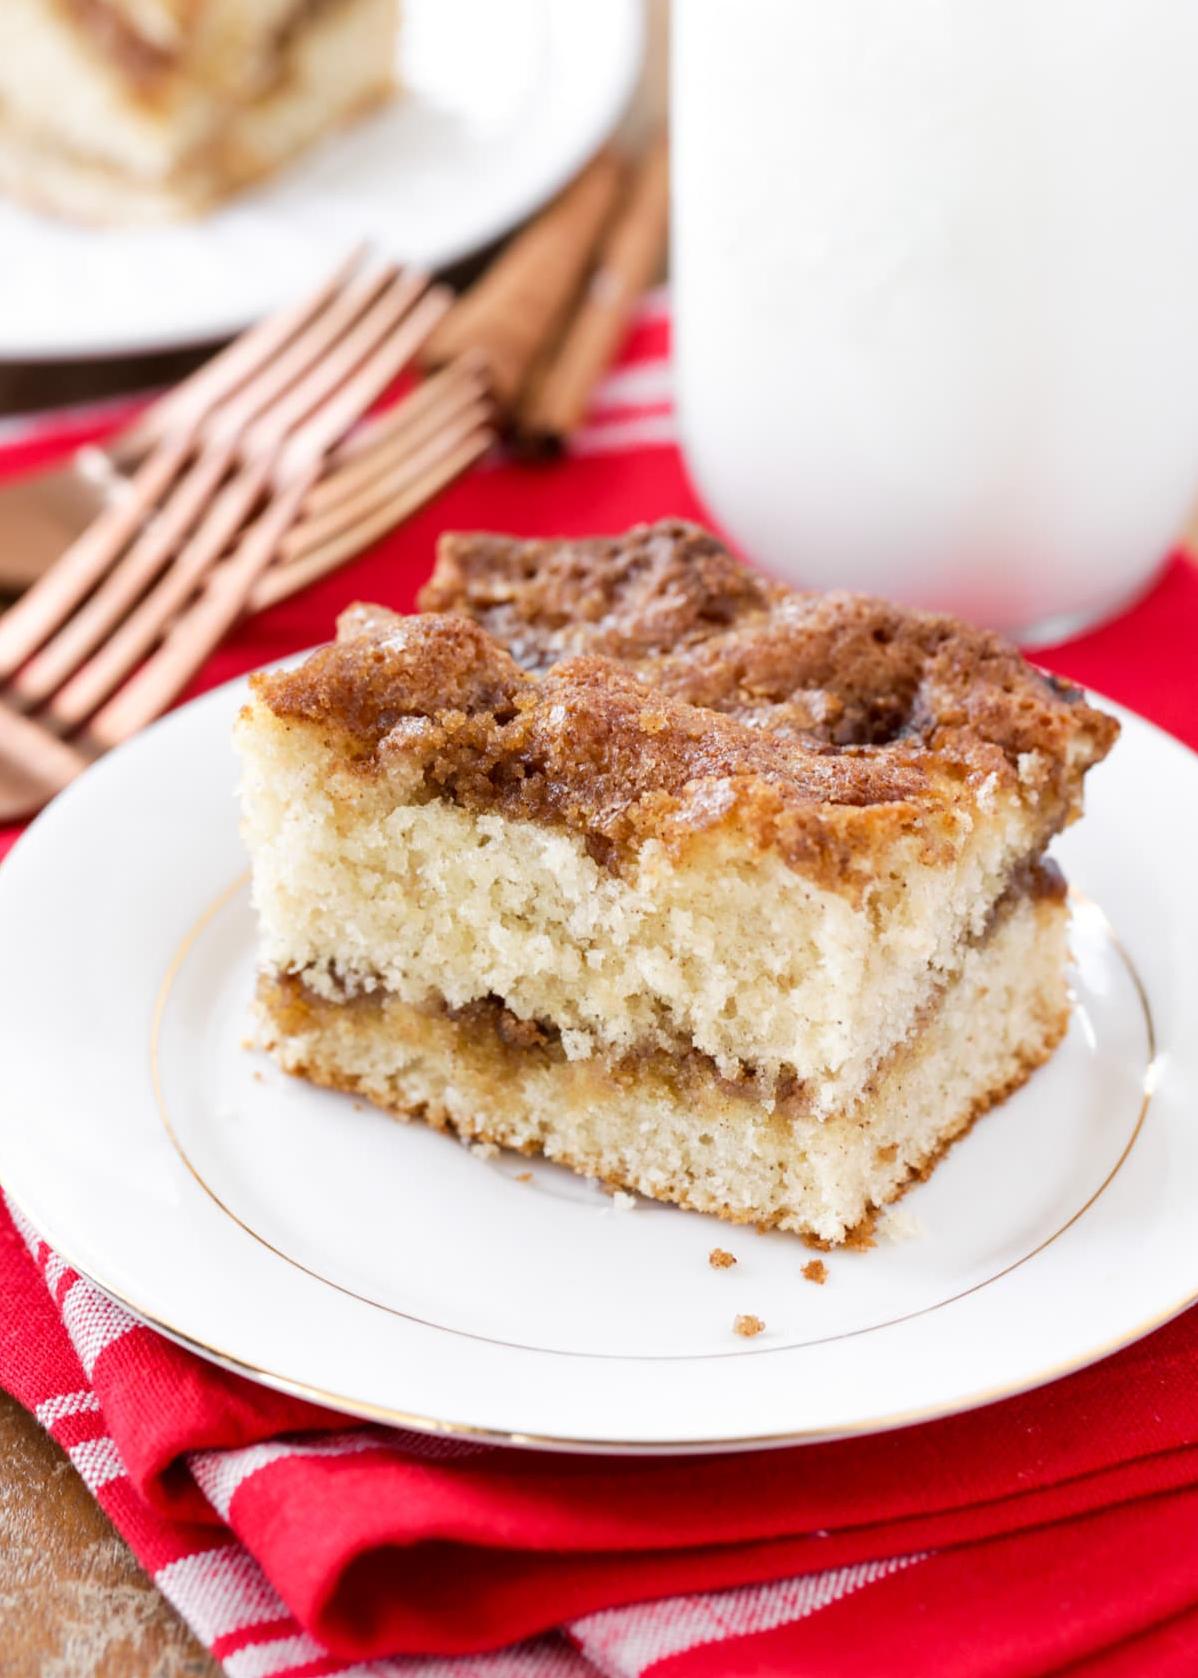  Satisfy your sweet tooth with this delicious coffee cake